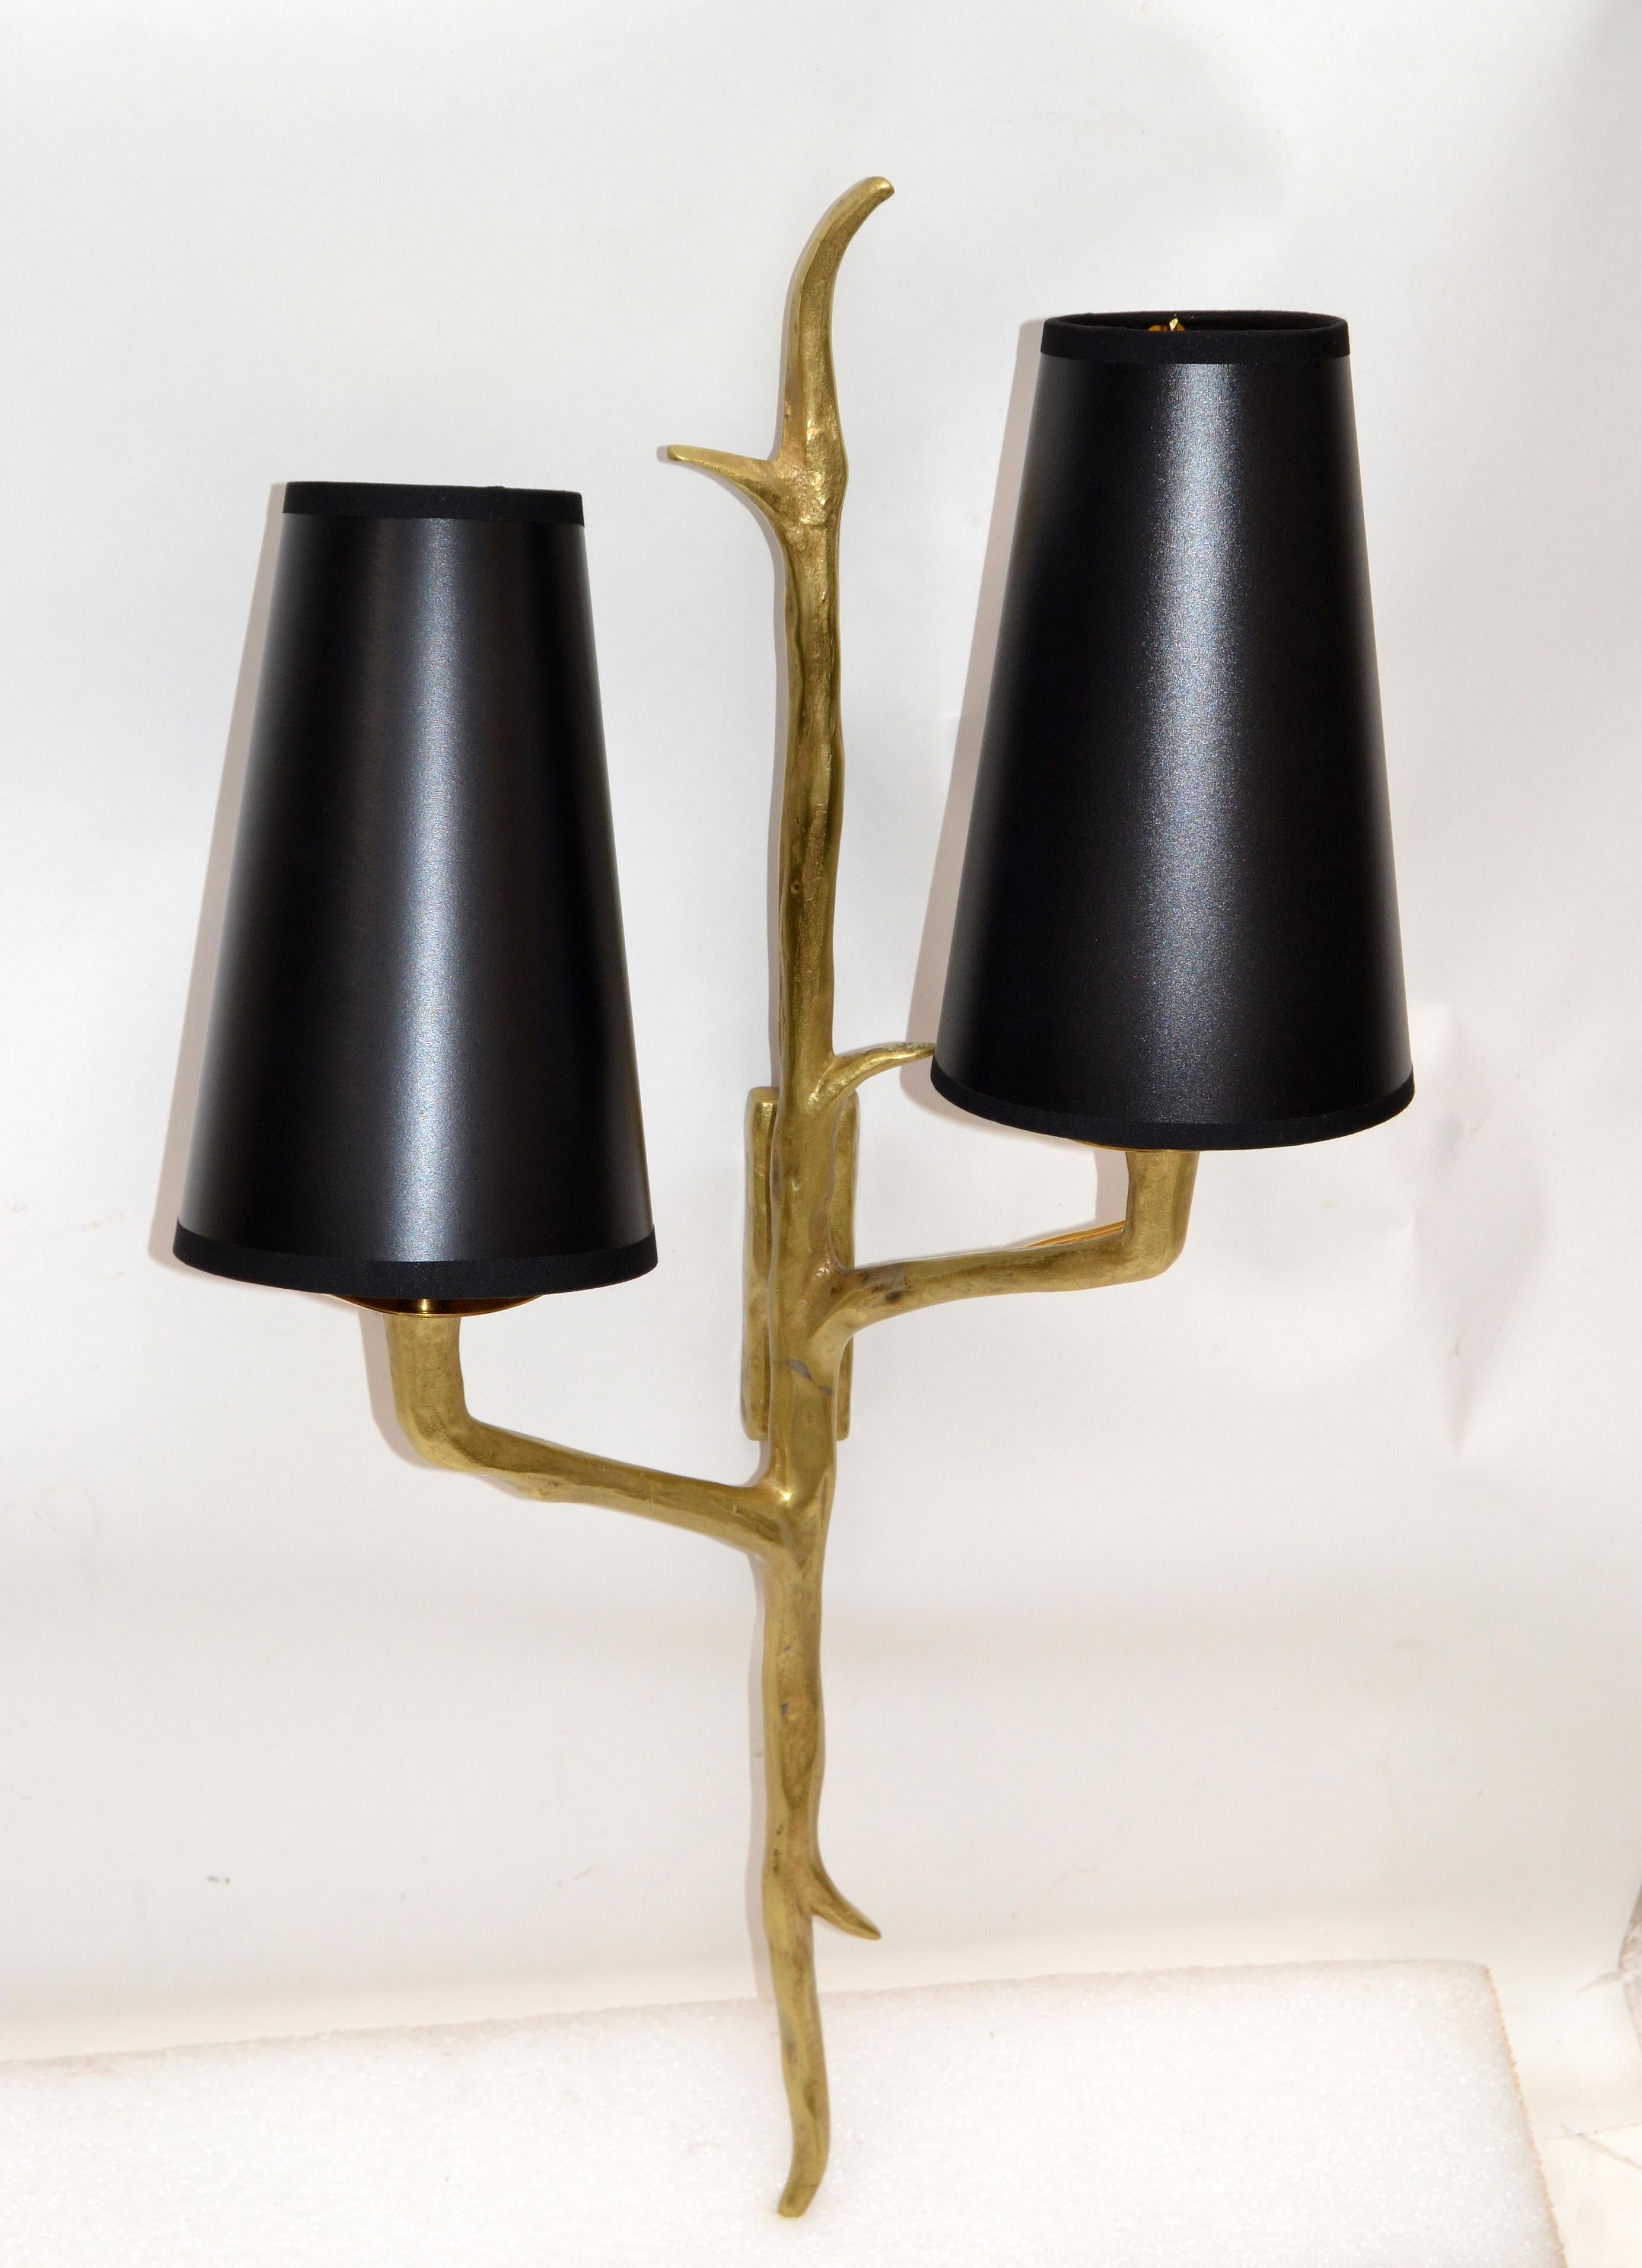 Pair of Agostini Style Sconces Bronze with Black and Gold Shades, France, 1950s For Sale 1